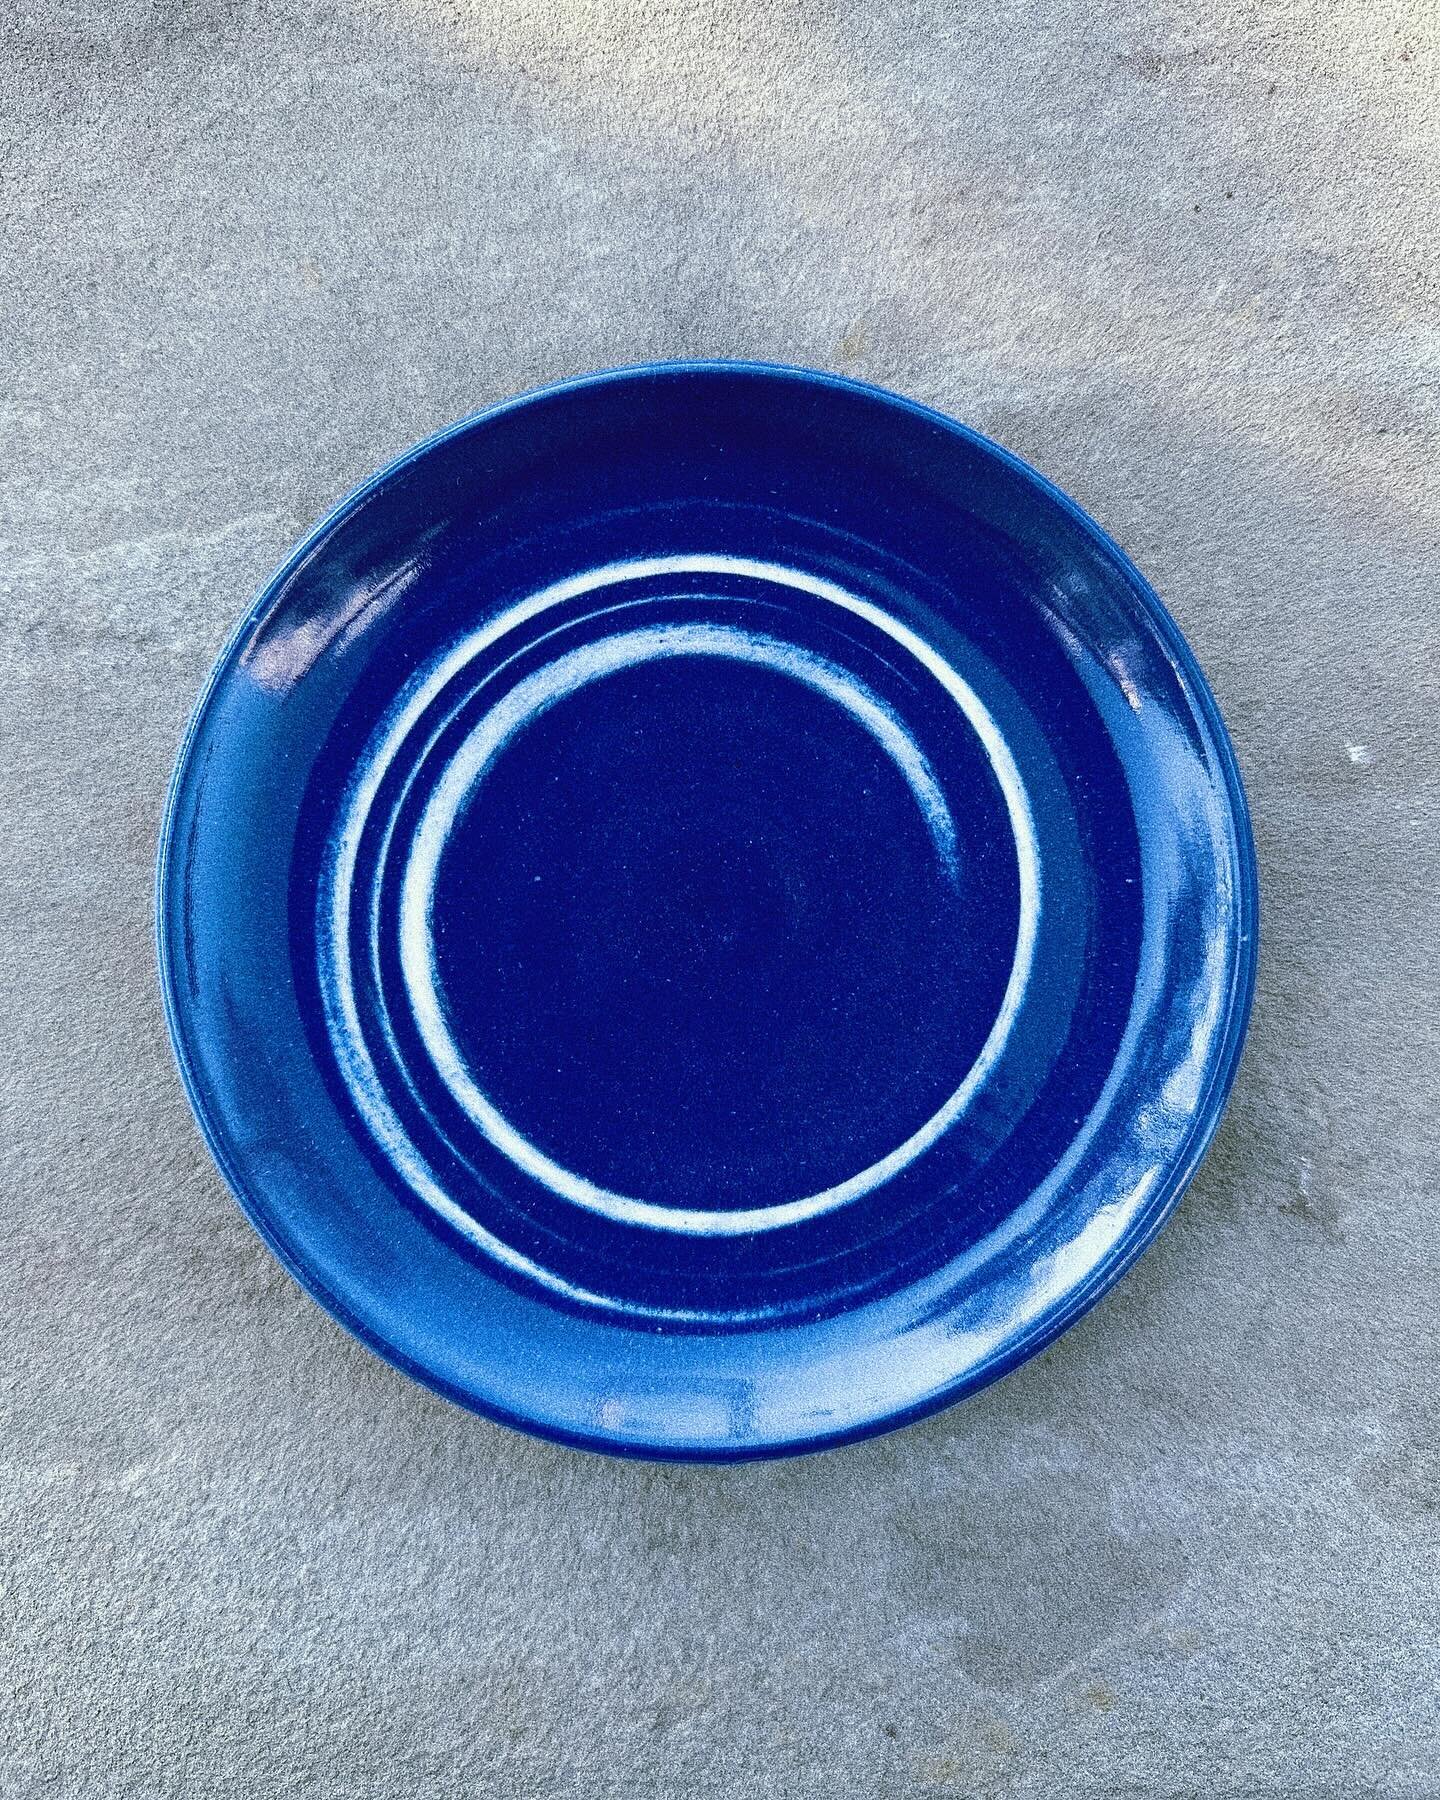 the color blue has been a staple in my pottery practice since the inception of eve christa ceramics in 2019. potters like myself use cobalt in the form of cobalt carbonate and cobalt oxide.&nbsp;it&rsquo;s personally my favorite color to work with an